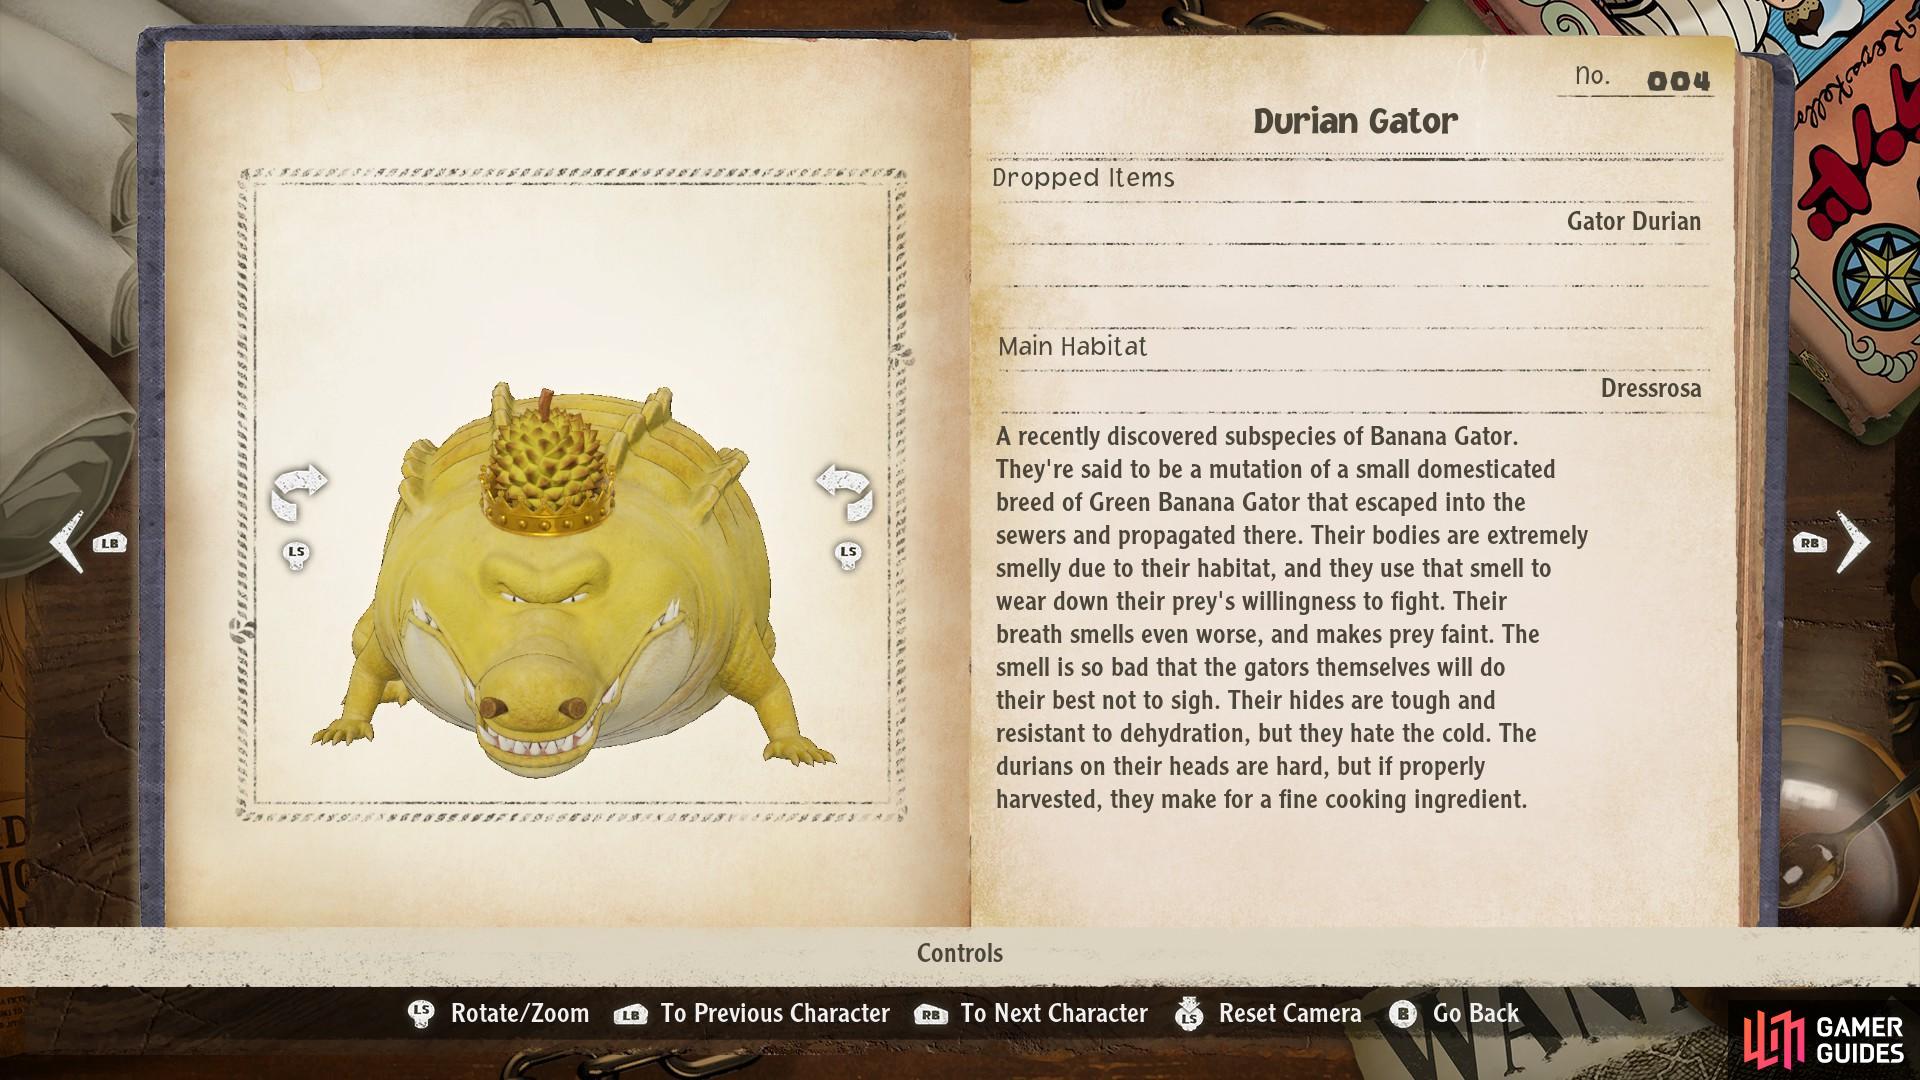 The !Durian Gator is a recently discovered subspecies of the Banana Gator